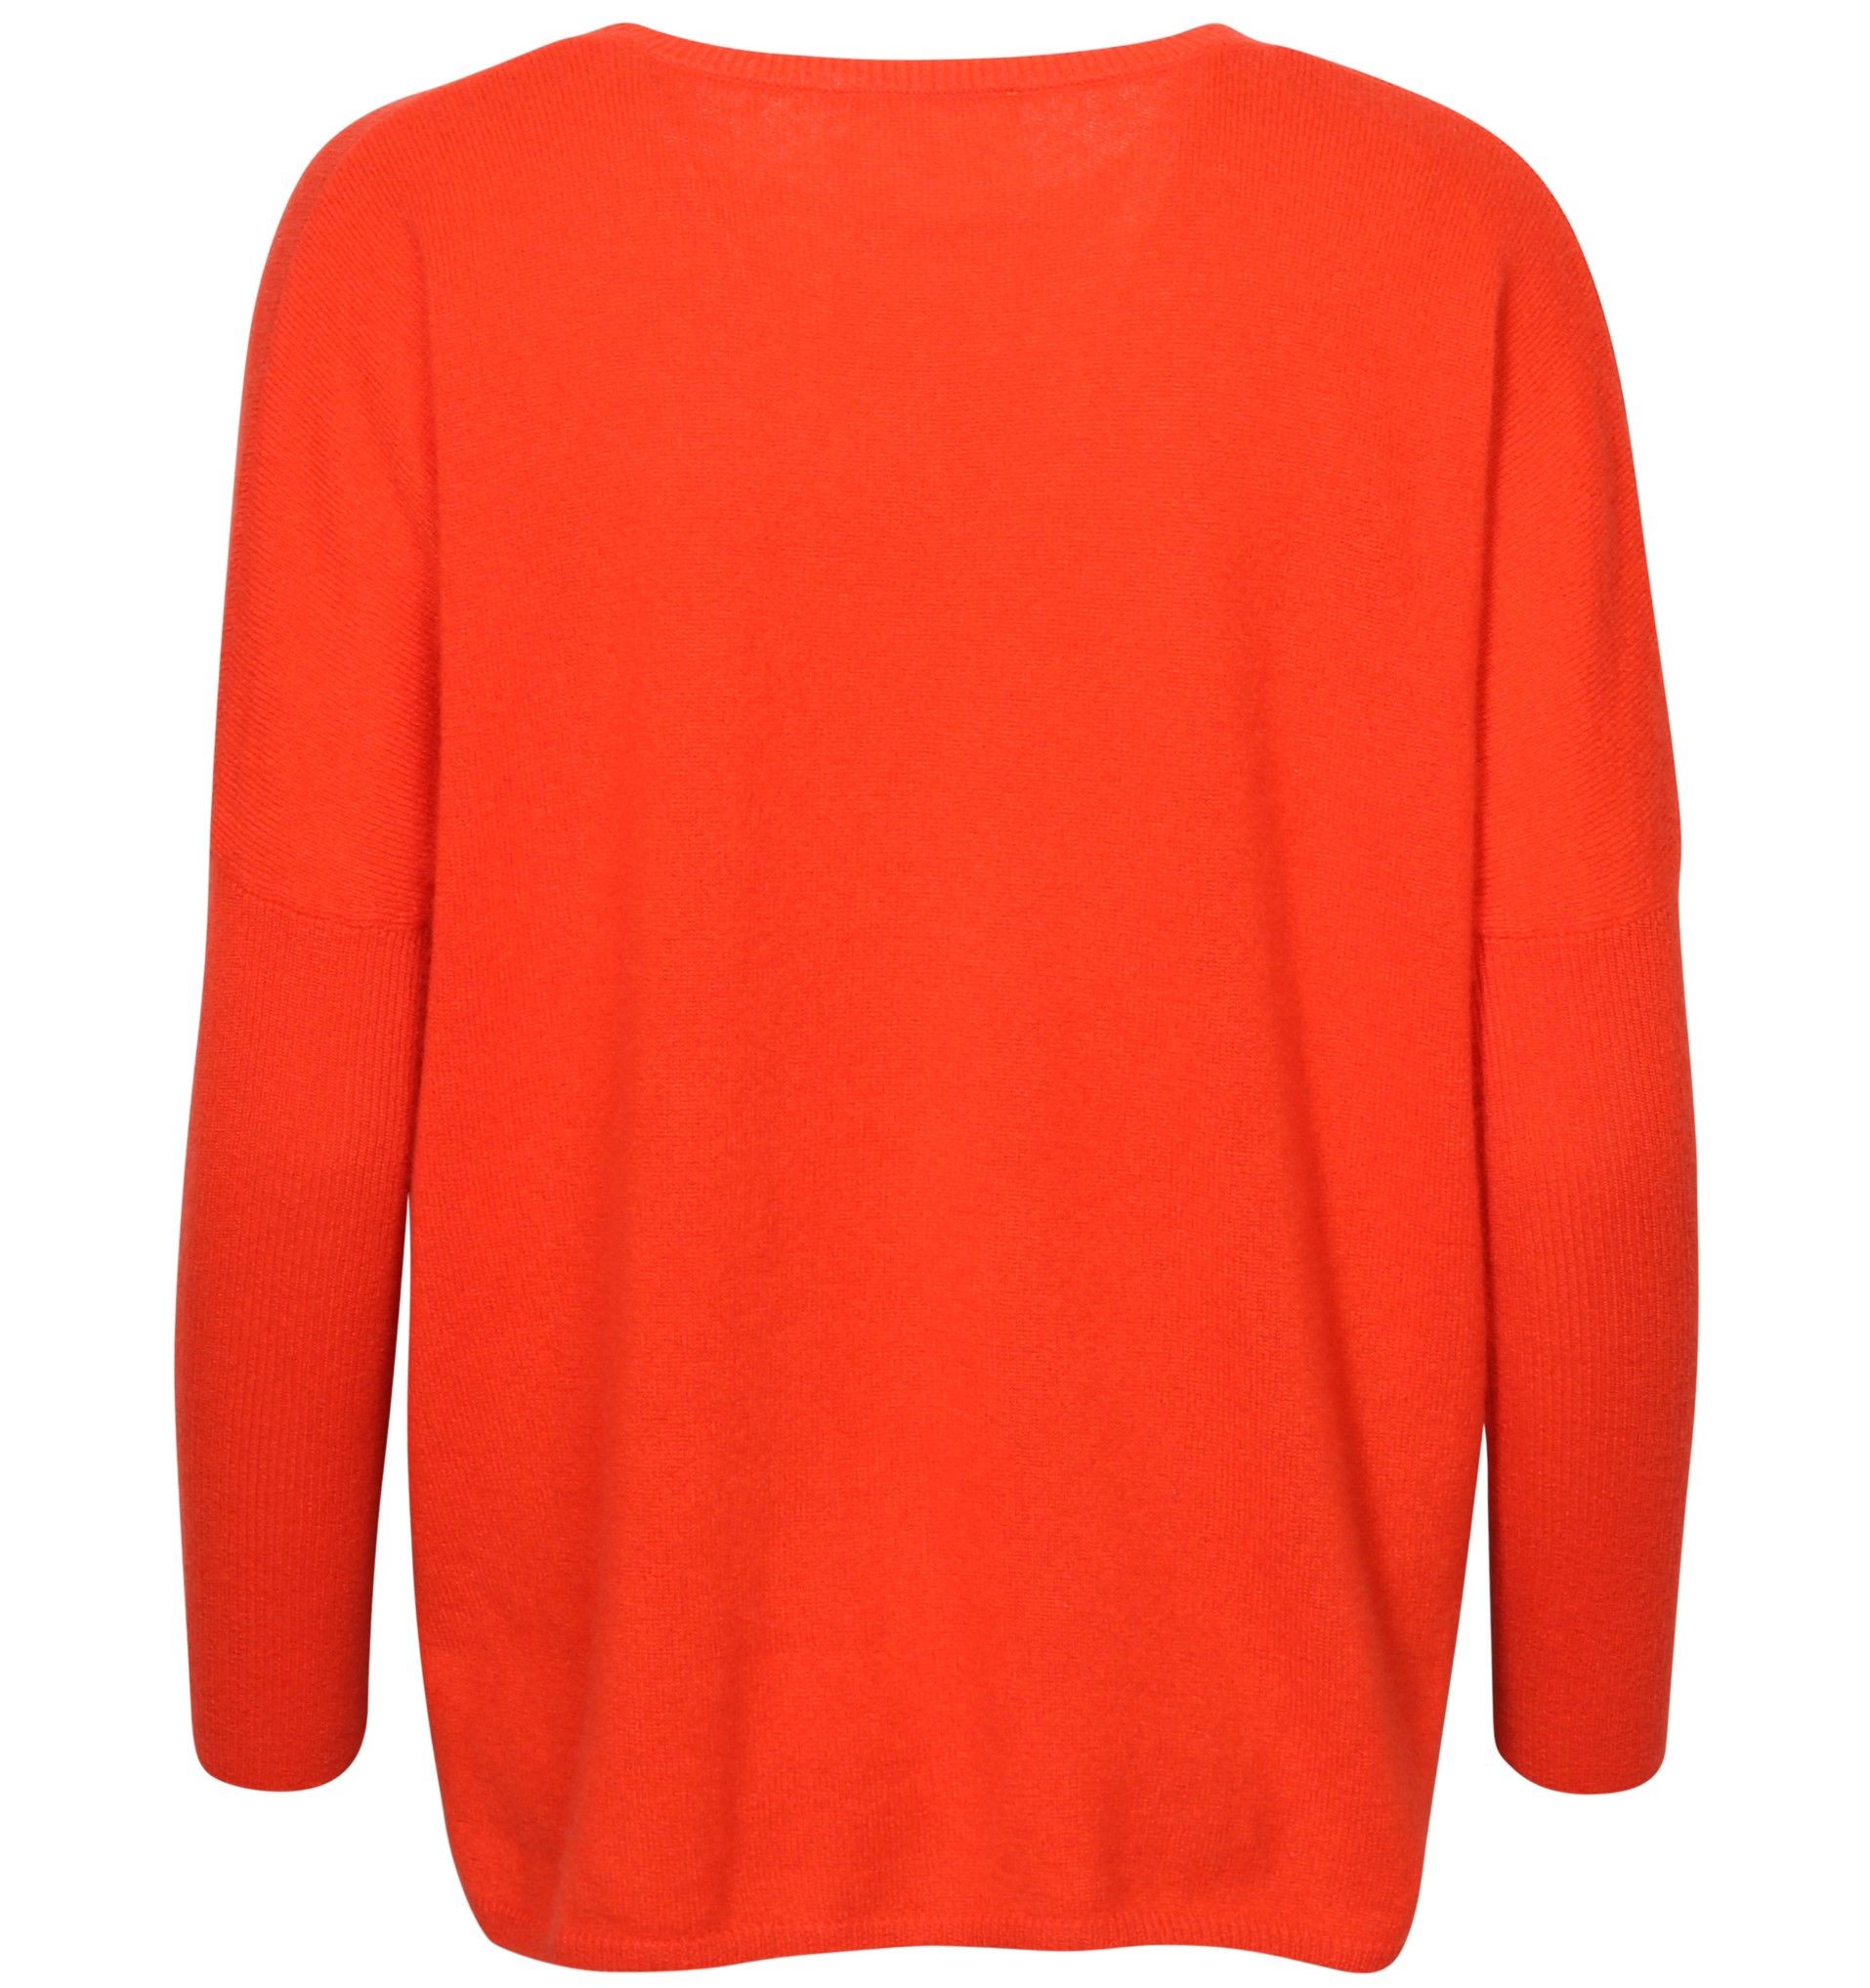 ABSOLUT CASHMERE Poncho Sweater Astrid in Orange S